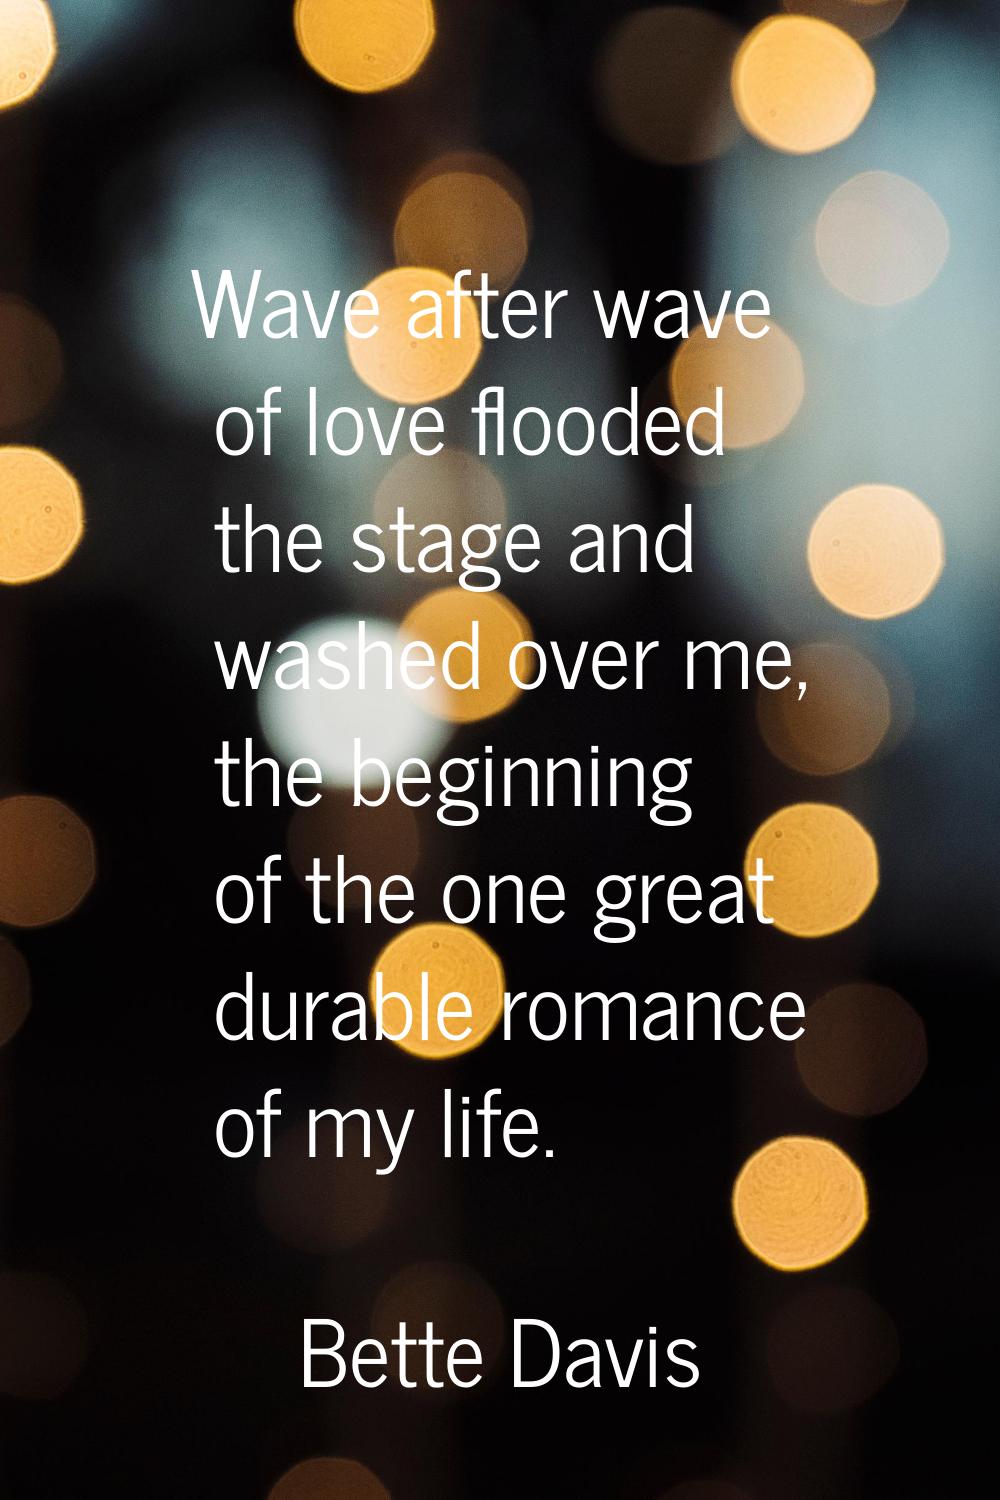 Wave after wave of love flooded the stage and washed over me, the beginning of the one great durabl